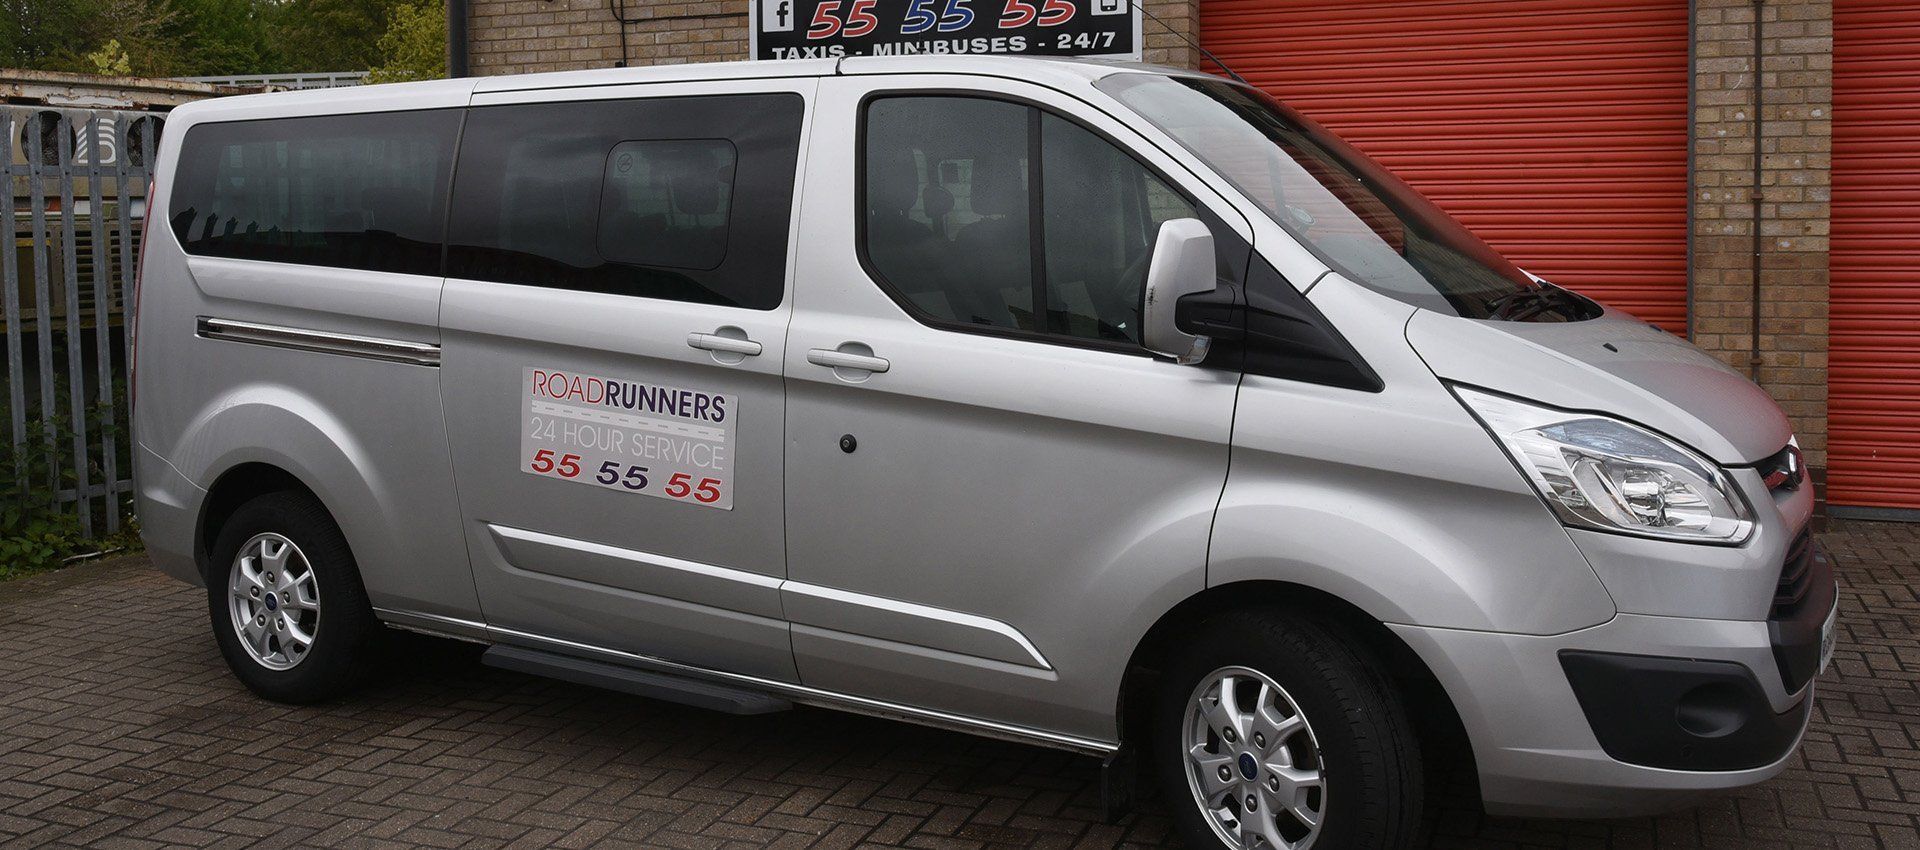 RoadRunners Taxis' Minibus and Wheelchair Friendly Vehicle